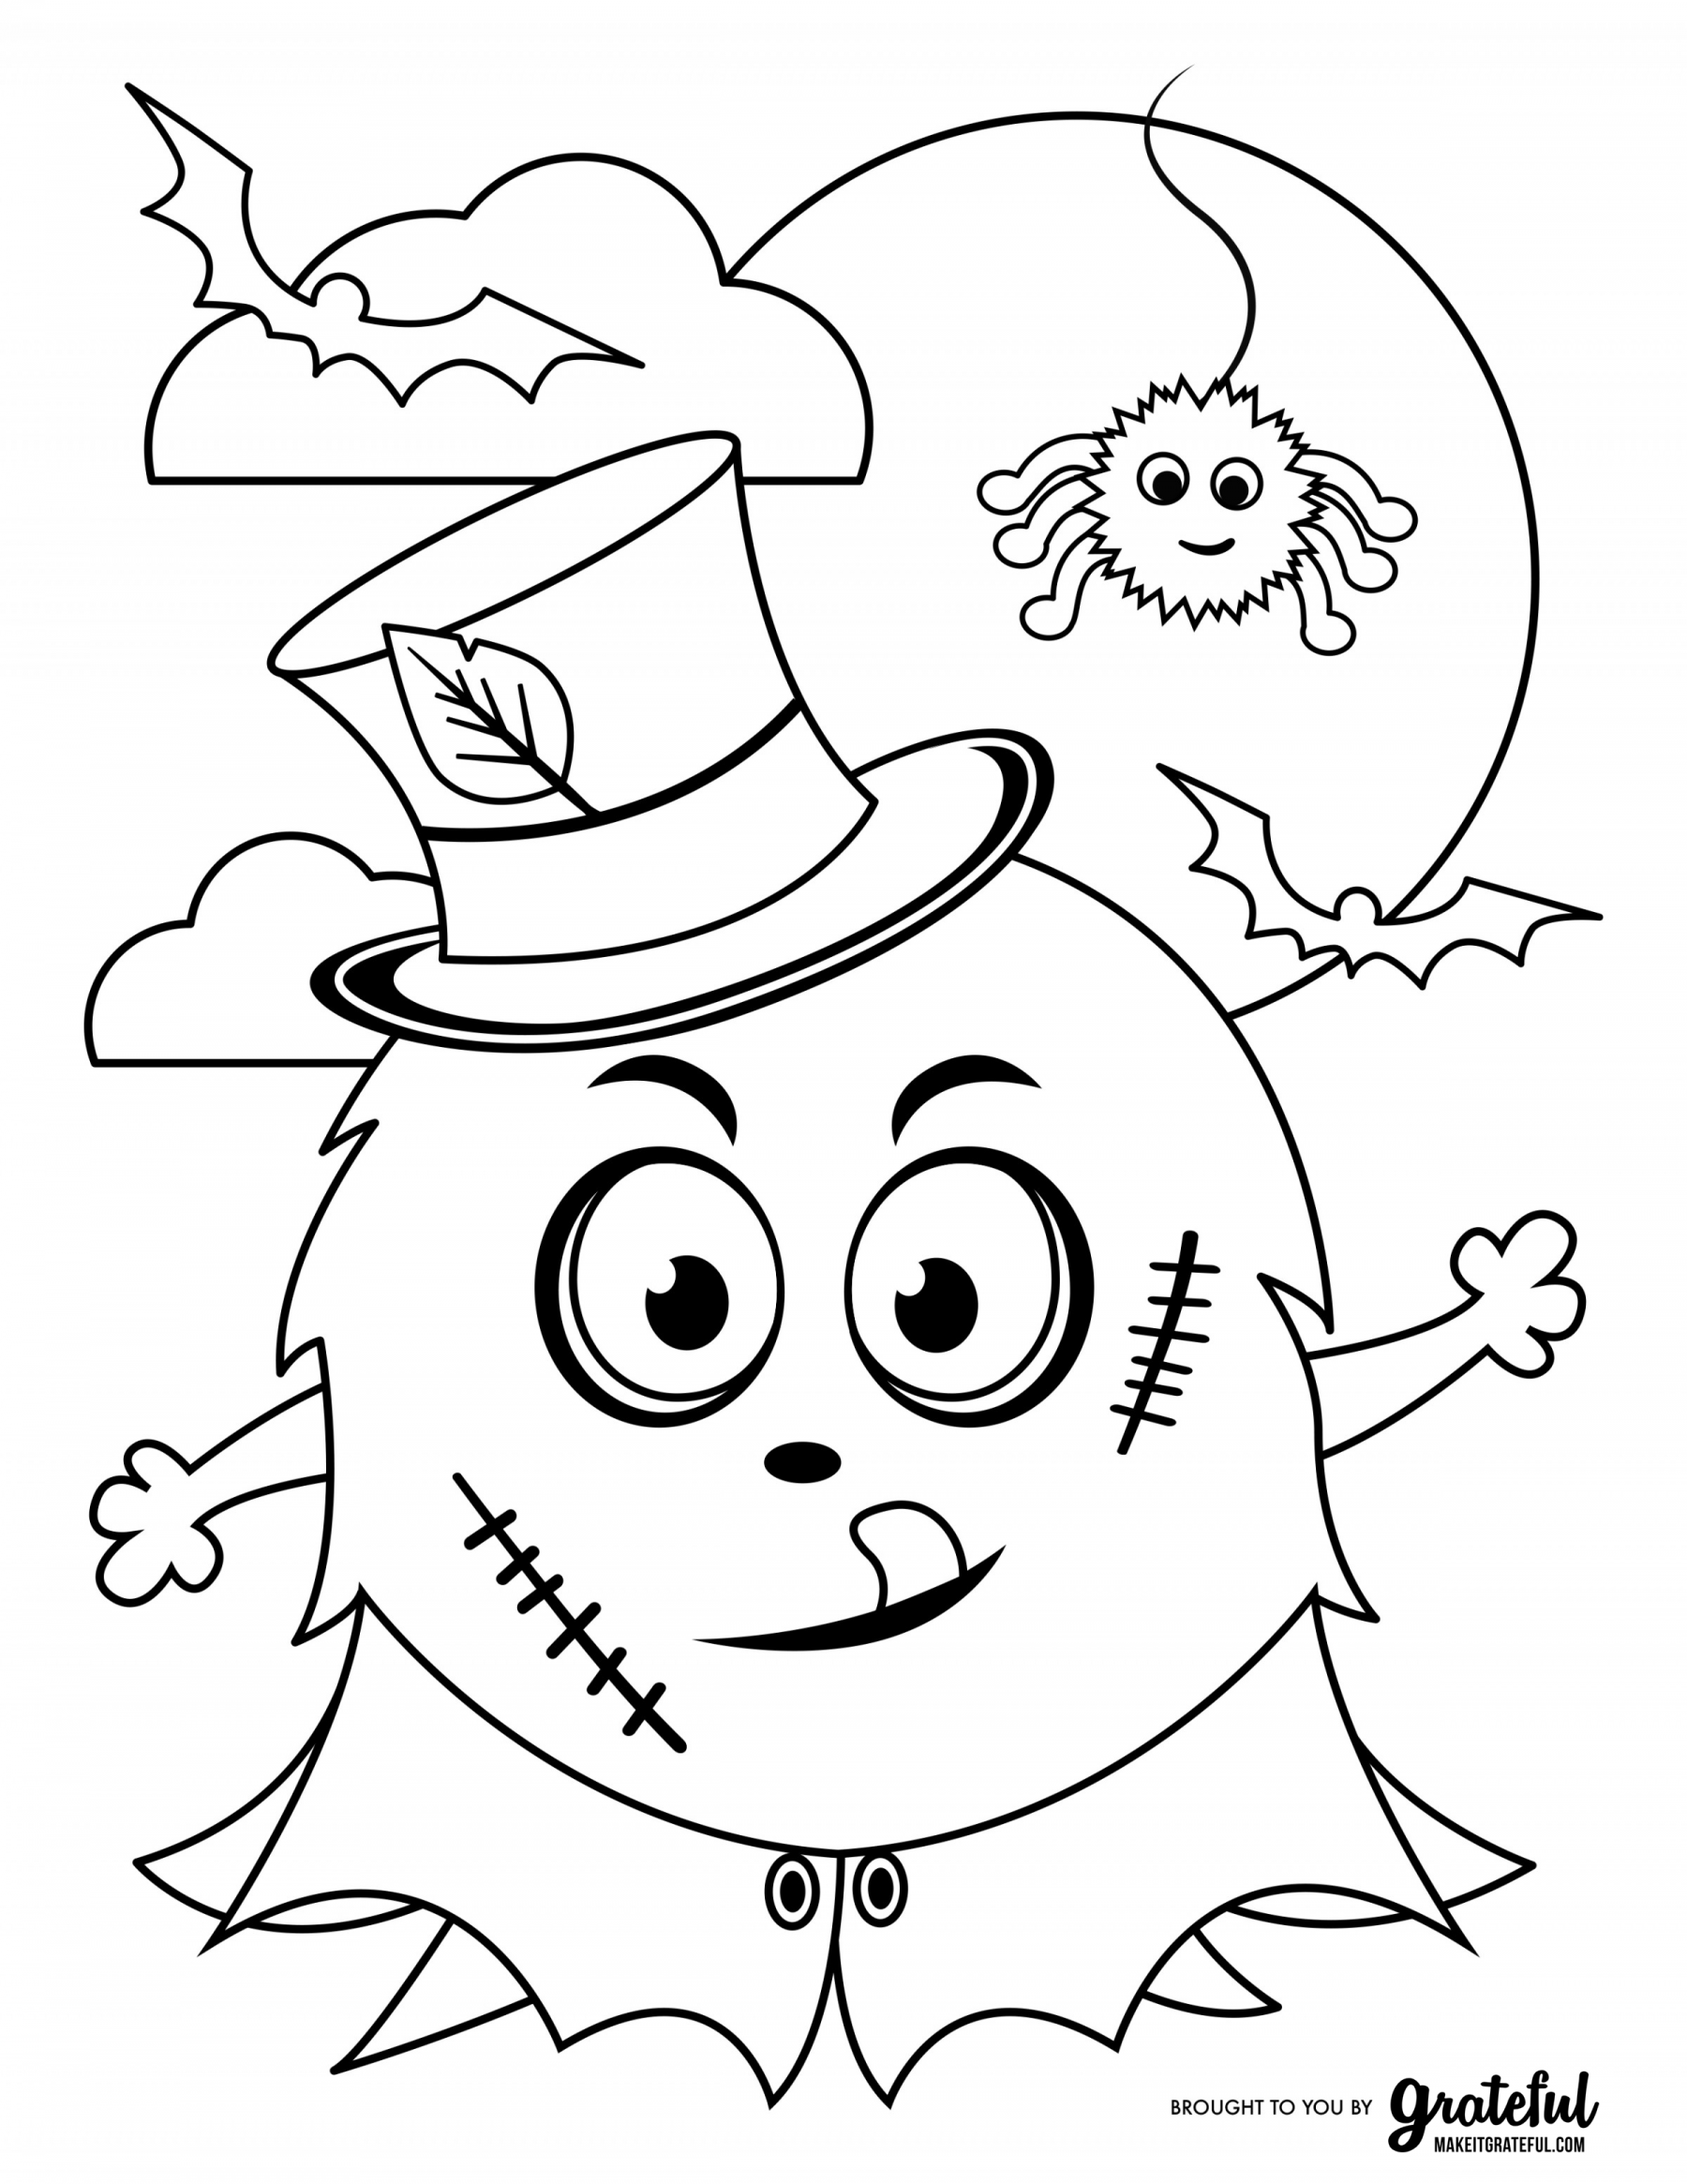 free-halloween-coloring-page-for-kids-or-for-the-kid-in-you